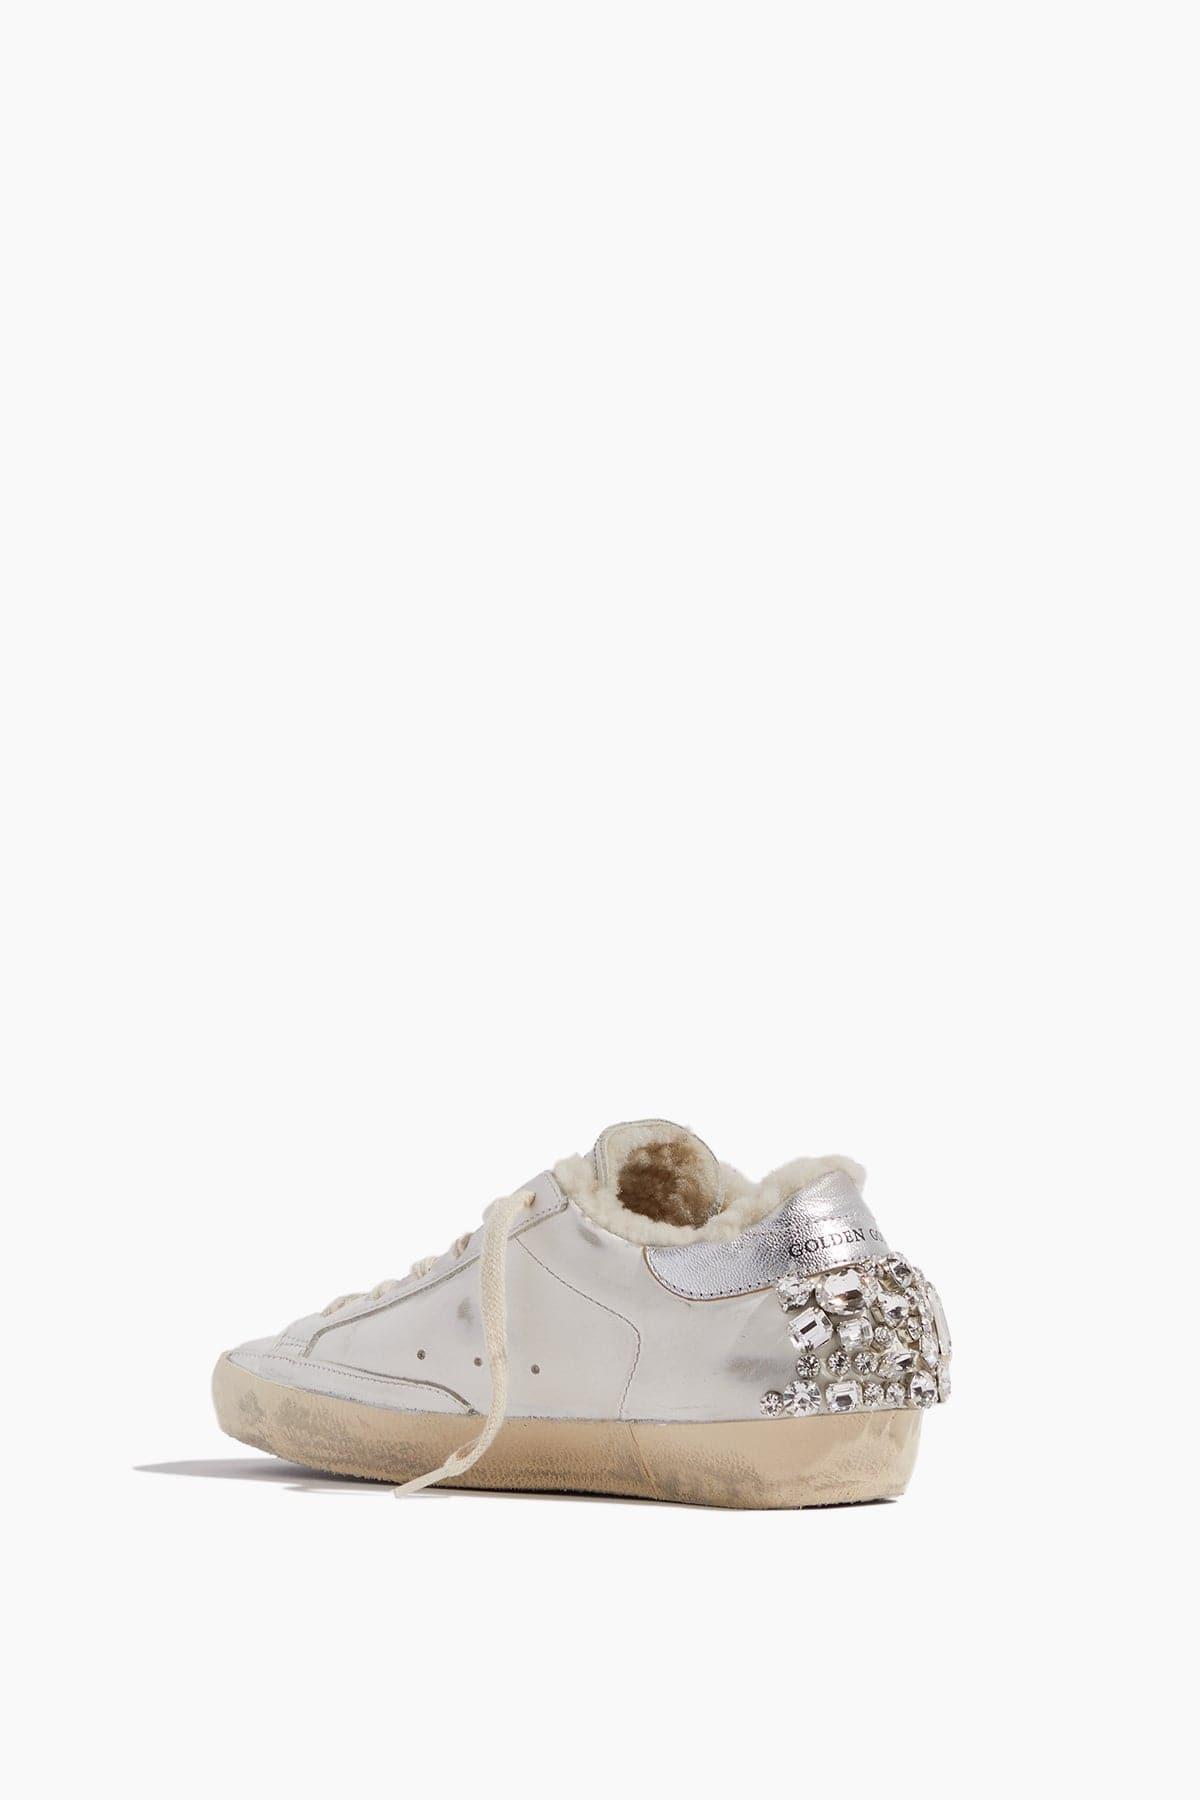 Golden Goose Superstar Sneaker With Diamond Studs in White | Lyst